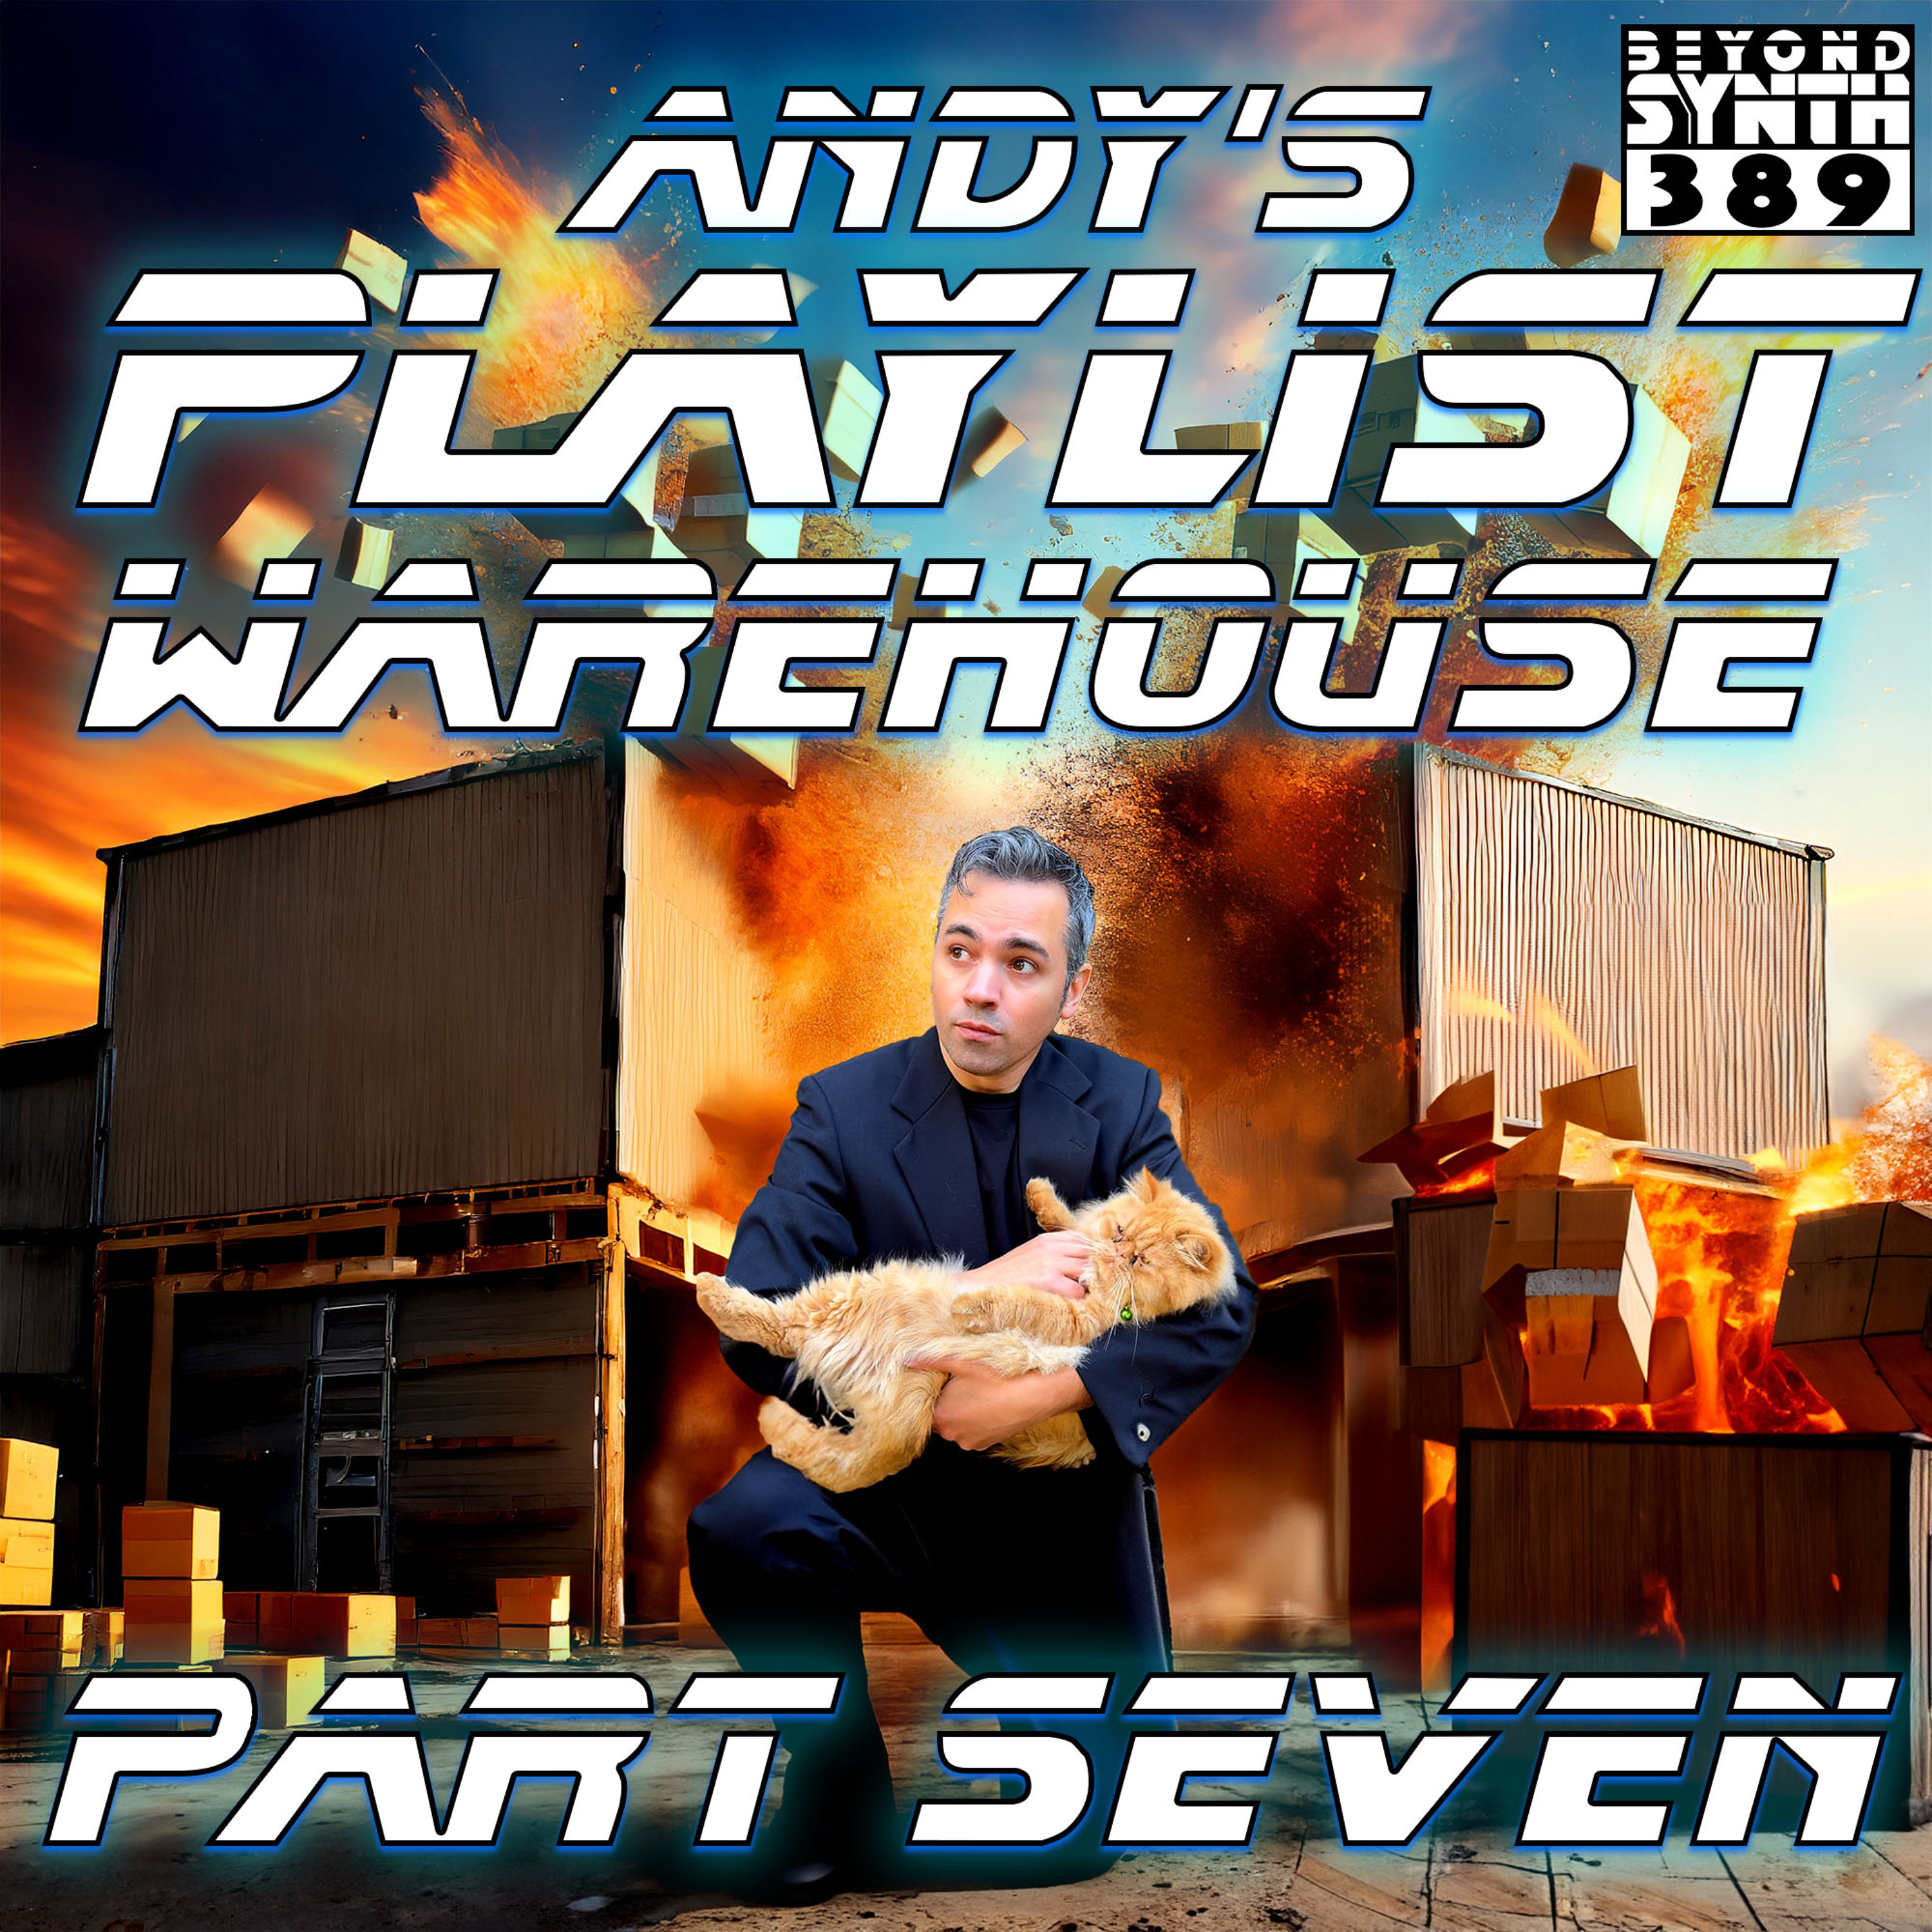 Beyond Synth - 389 - Andy's Playlist Warehouse 07 with Kyle, Akio, and Rama